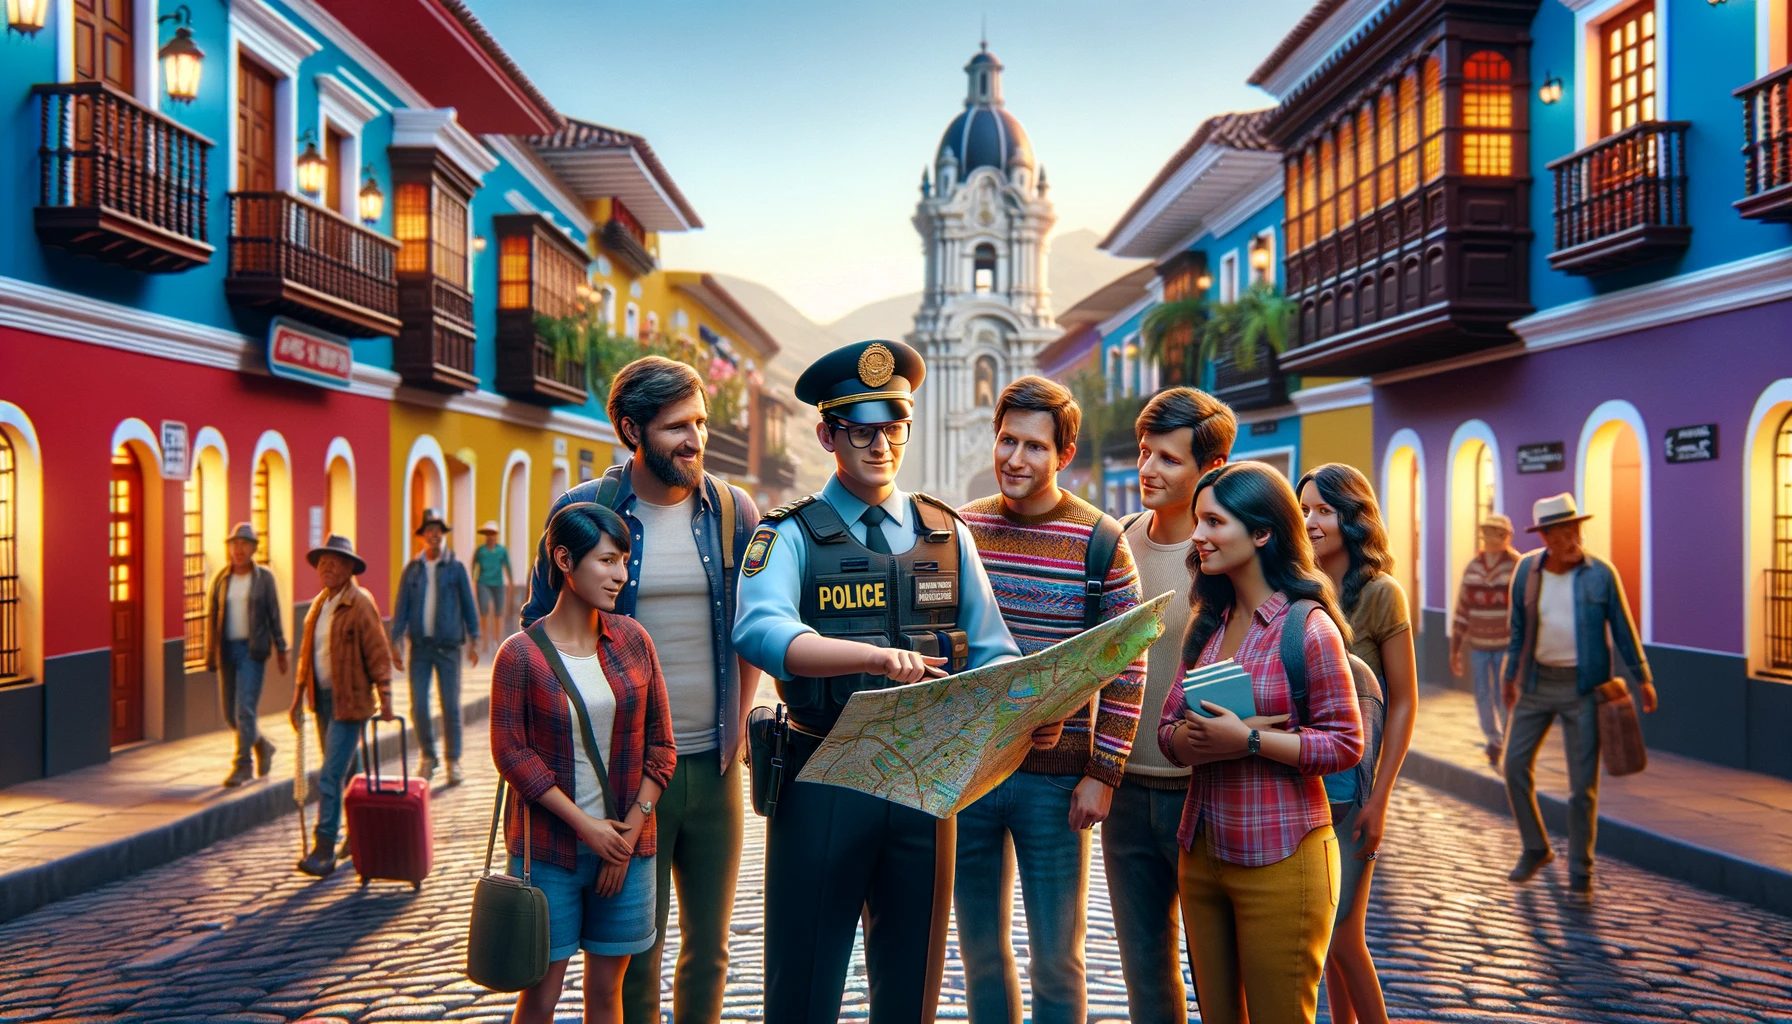 Animated officer assisting tourists with map in colorful street.